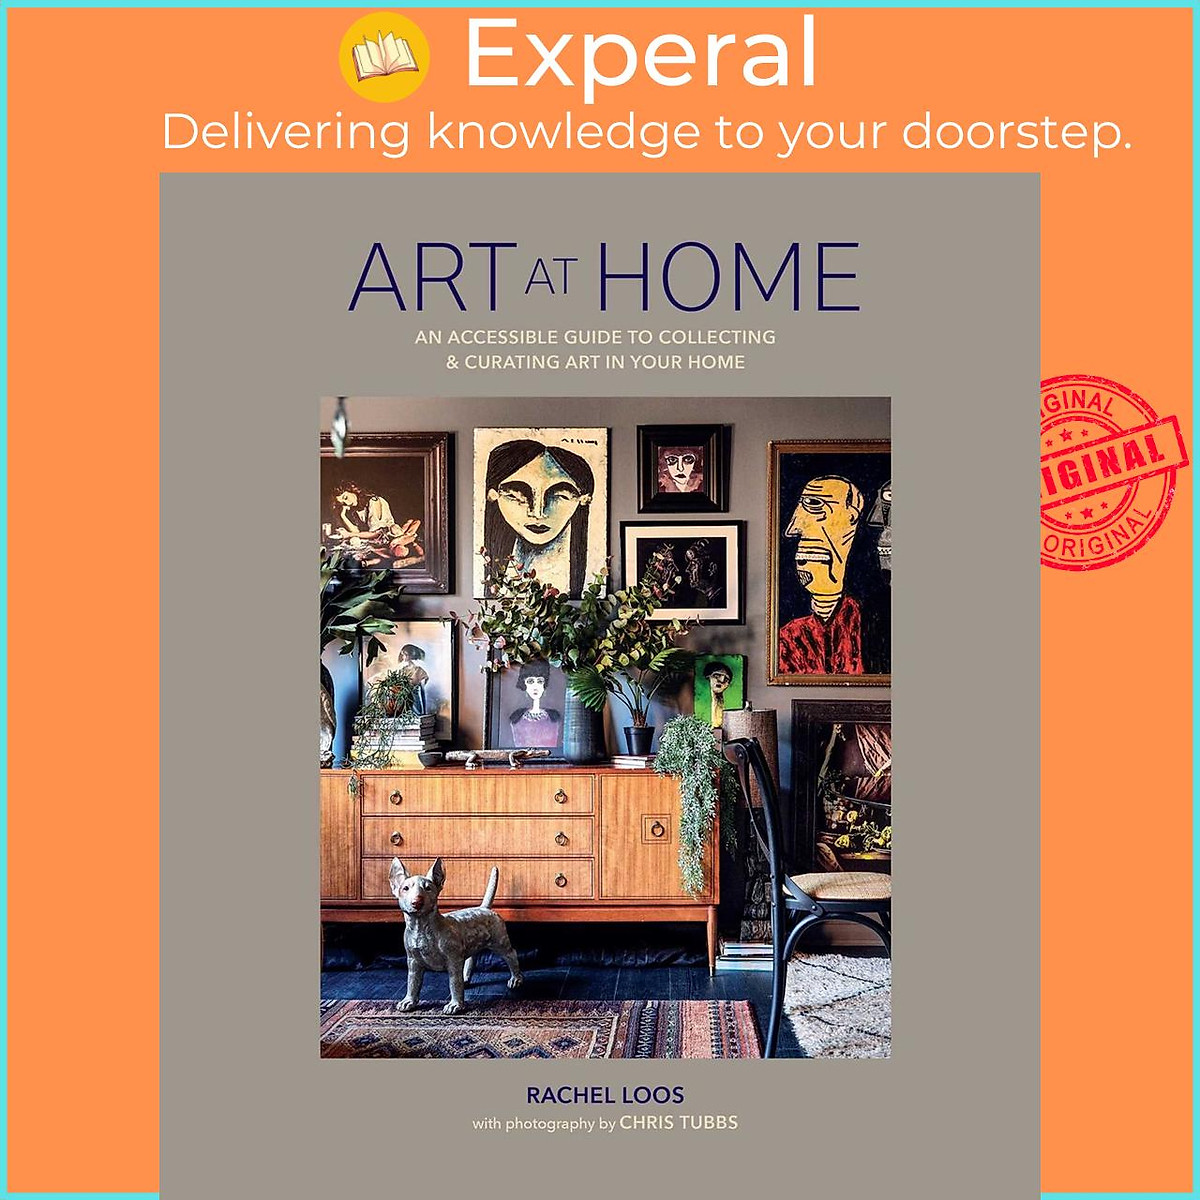 Sách - Art at Home - An accessible guide to collecting and cura by Rachel Loos (US edition, Hardcover Paper over boards)